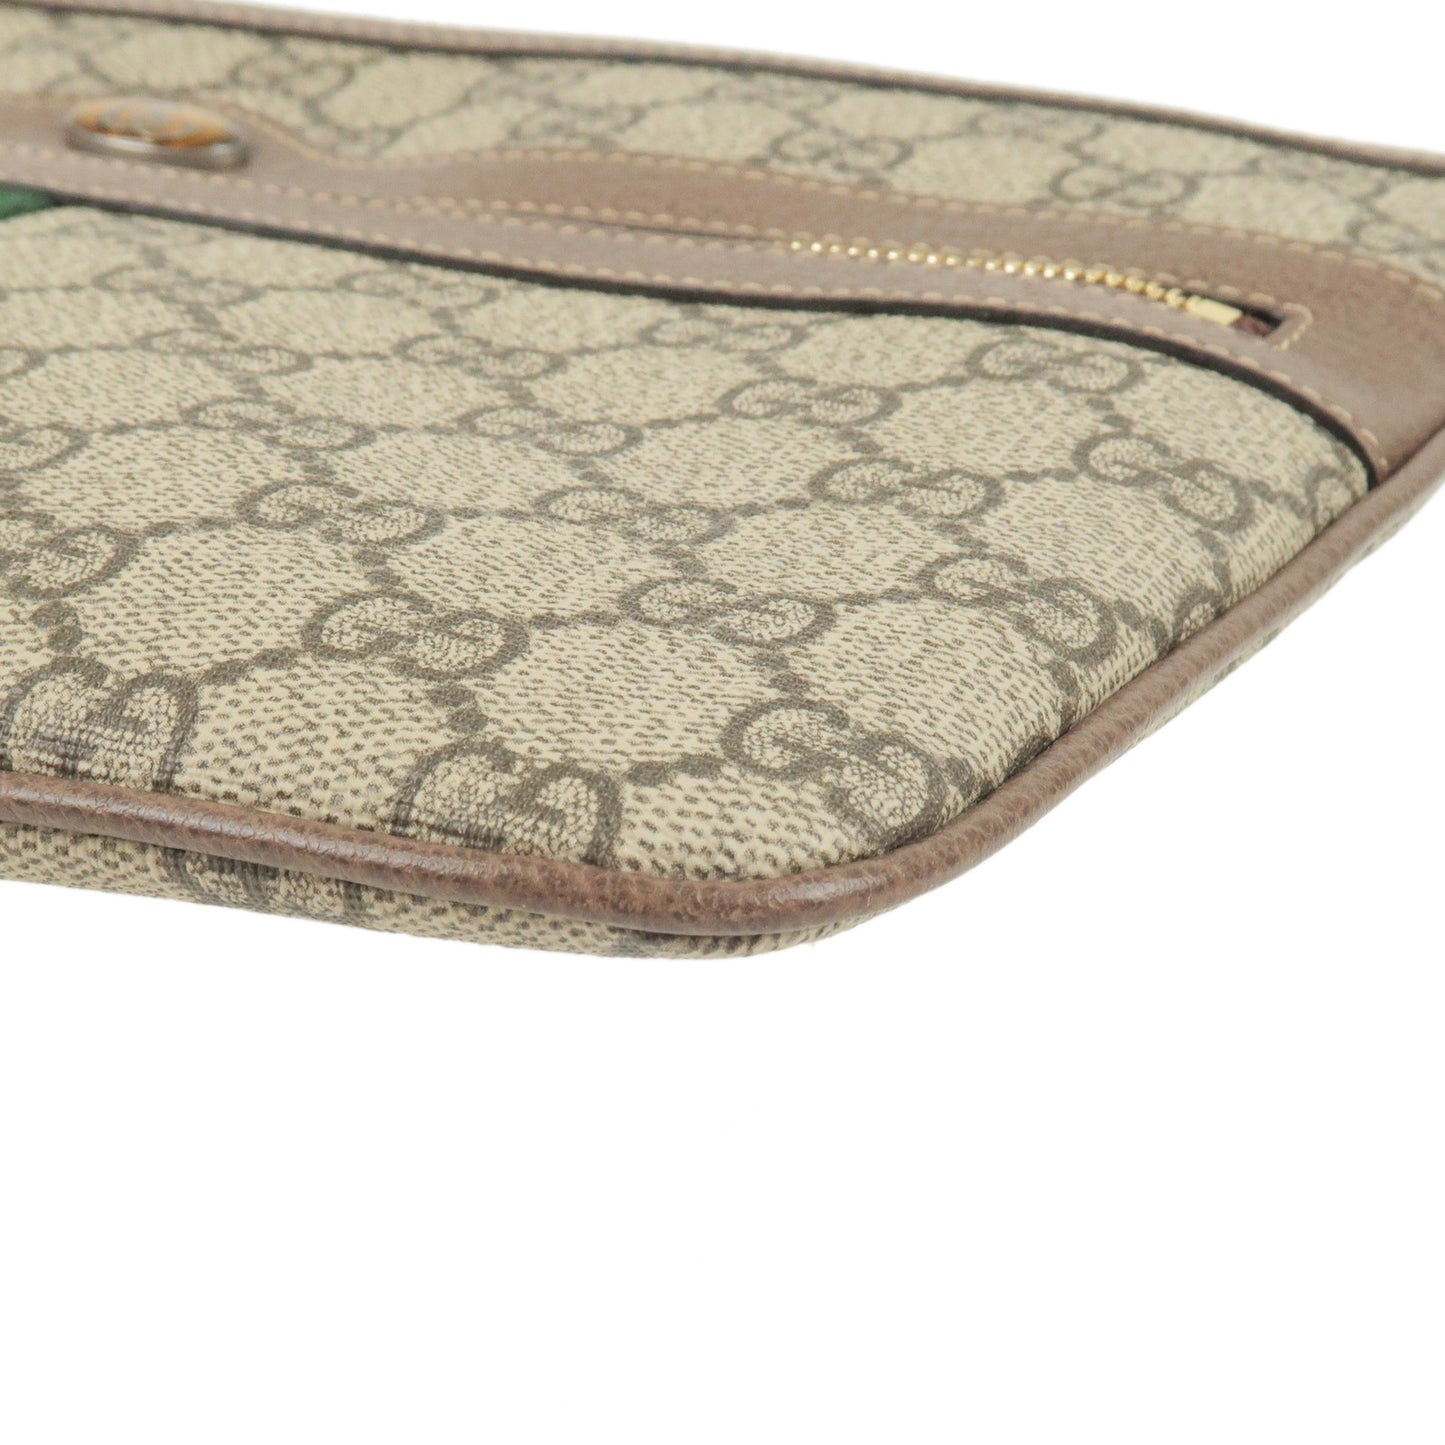 GUCCI Sherry Ophidia GG Supreme Leather Clutch Bag Beige 517551